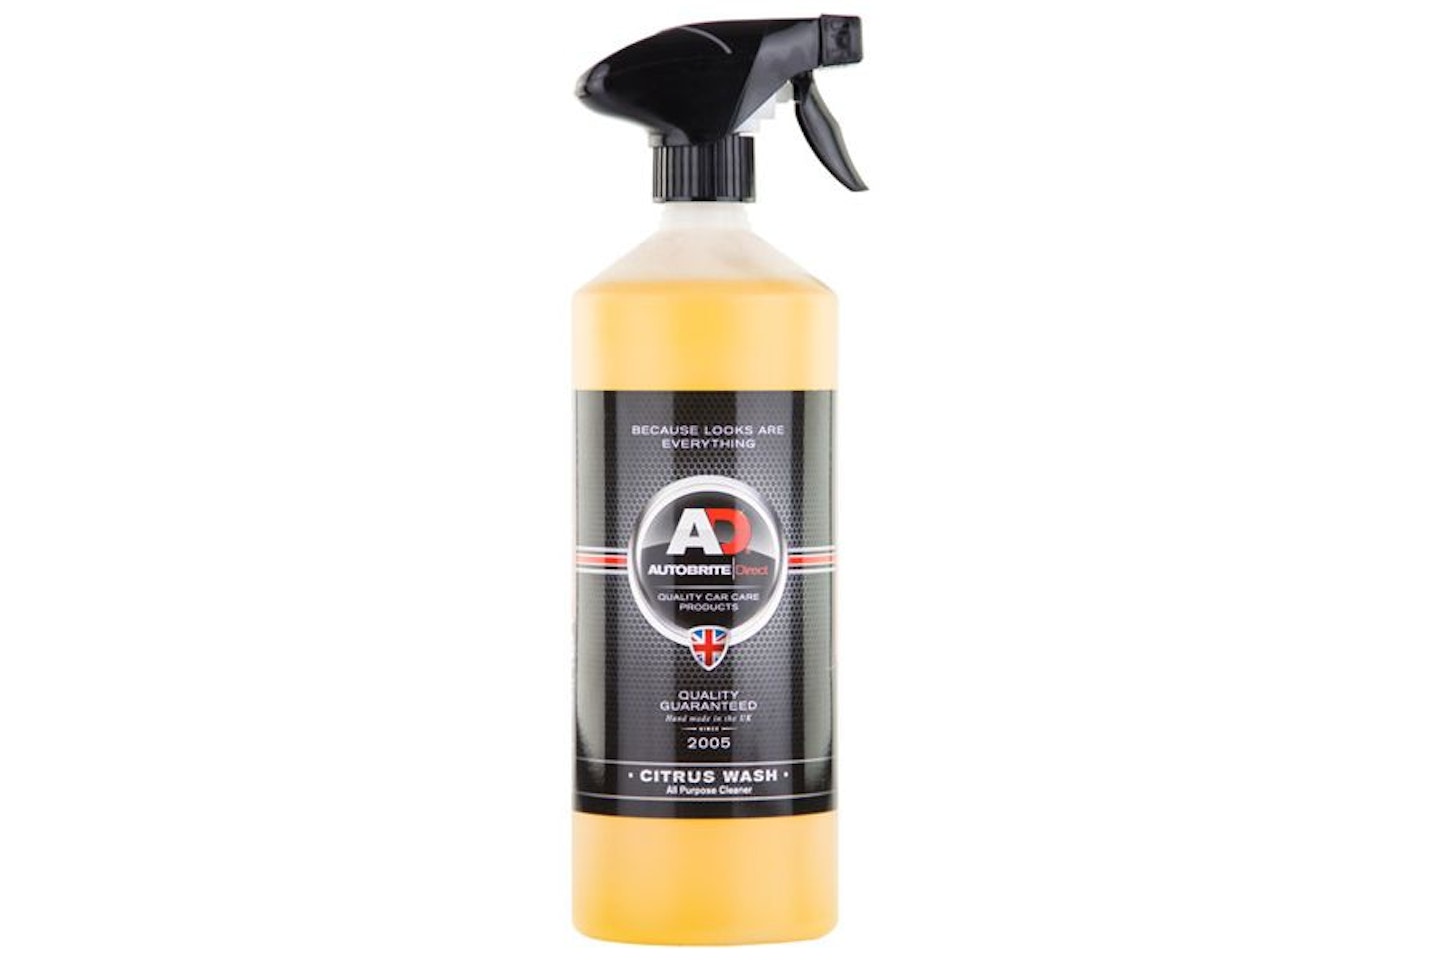 Mothers Professional APC (All-Purpose Cleaner) - Car Care Europe